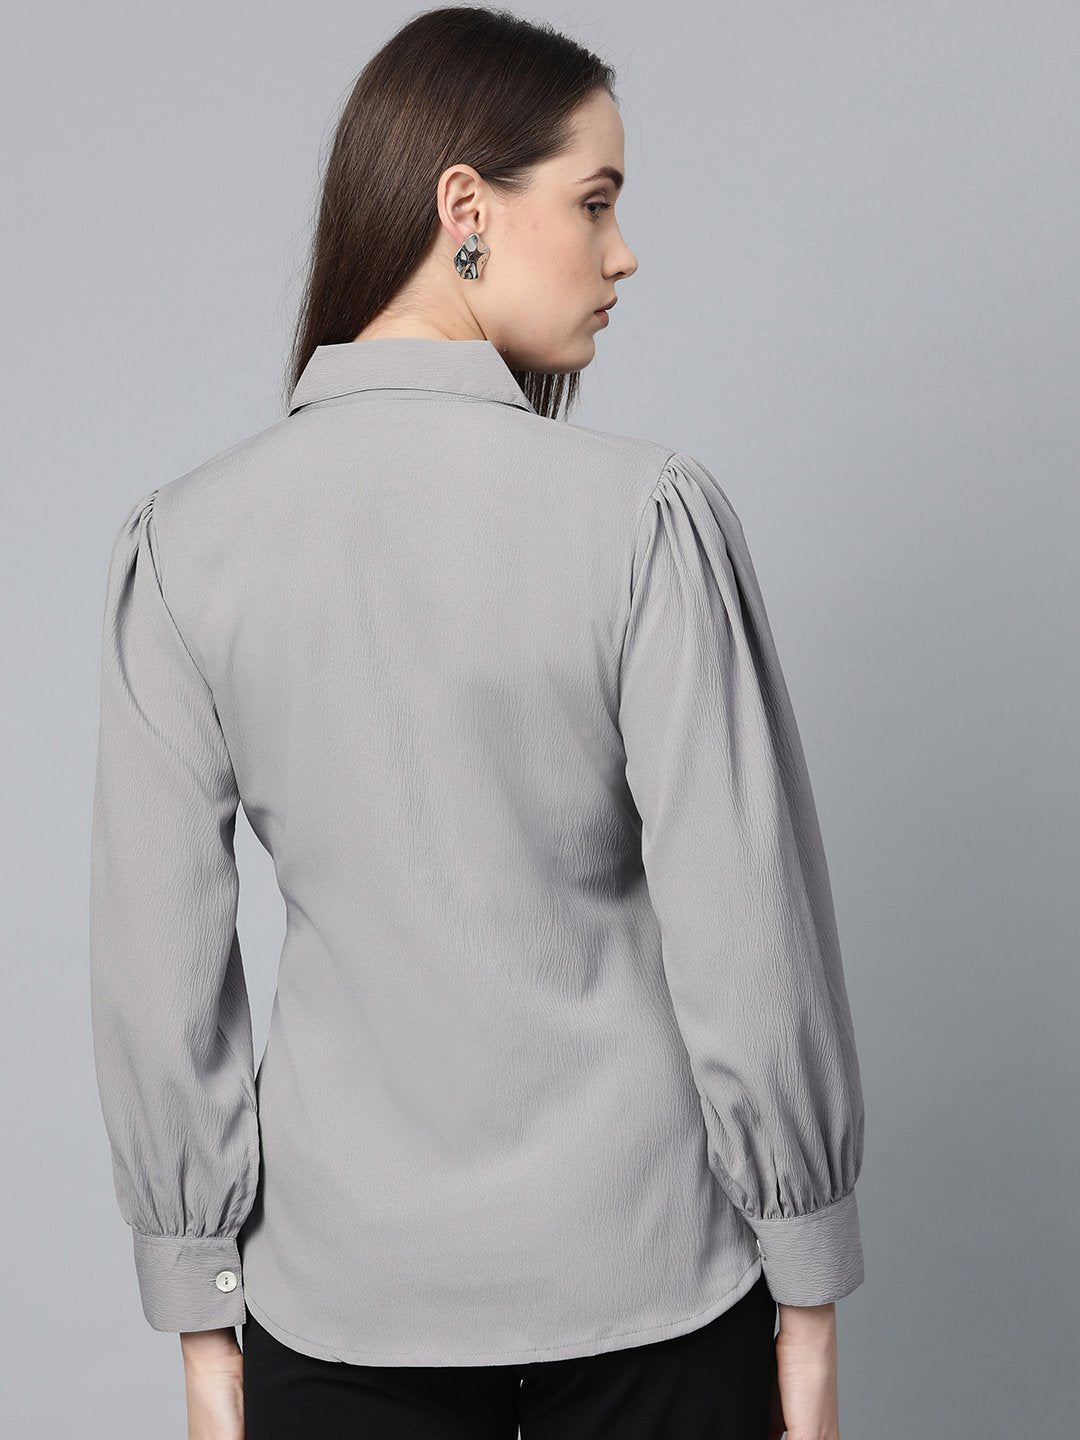 Women's Grey Regular Fit Crinkled Effect Casual Shirt - Jompers